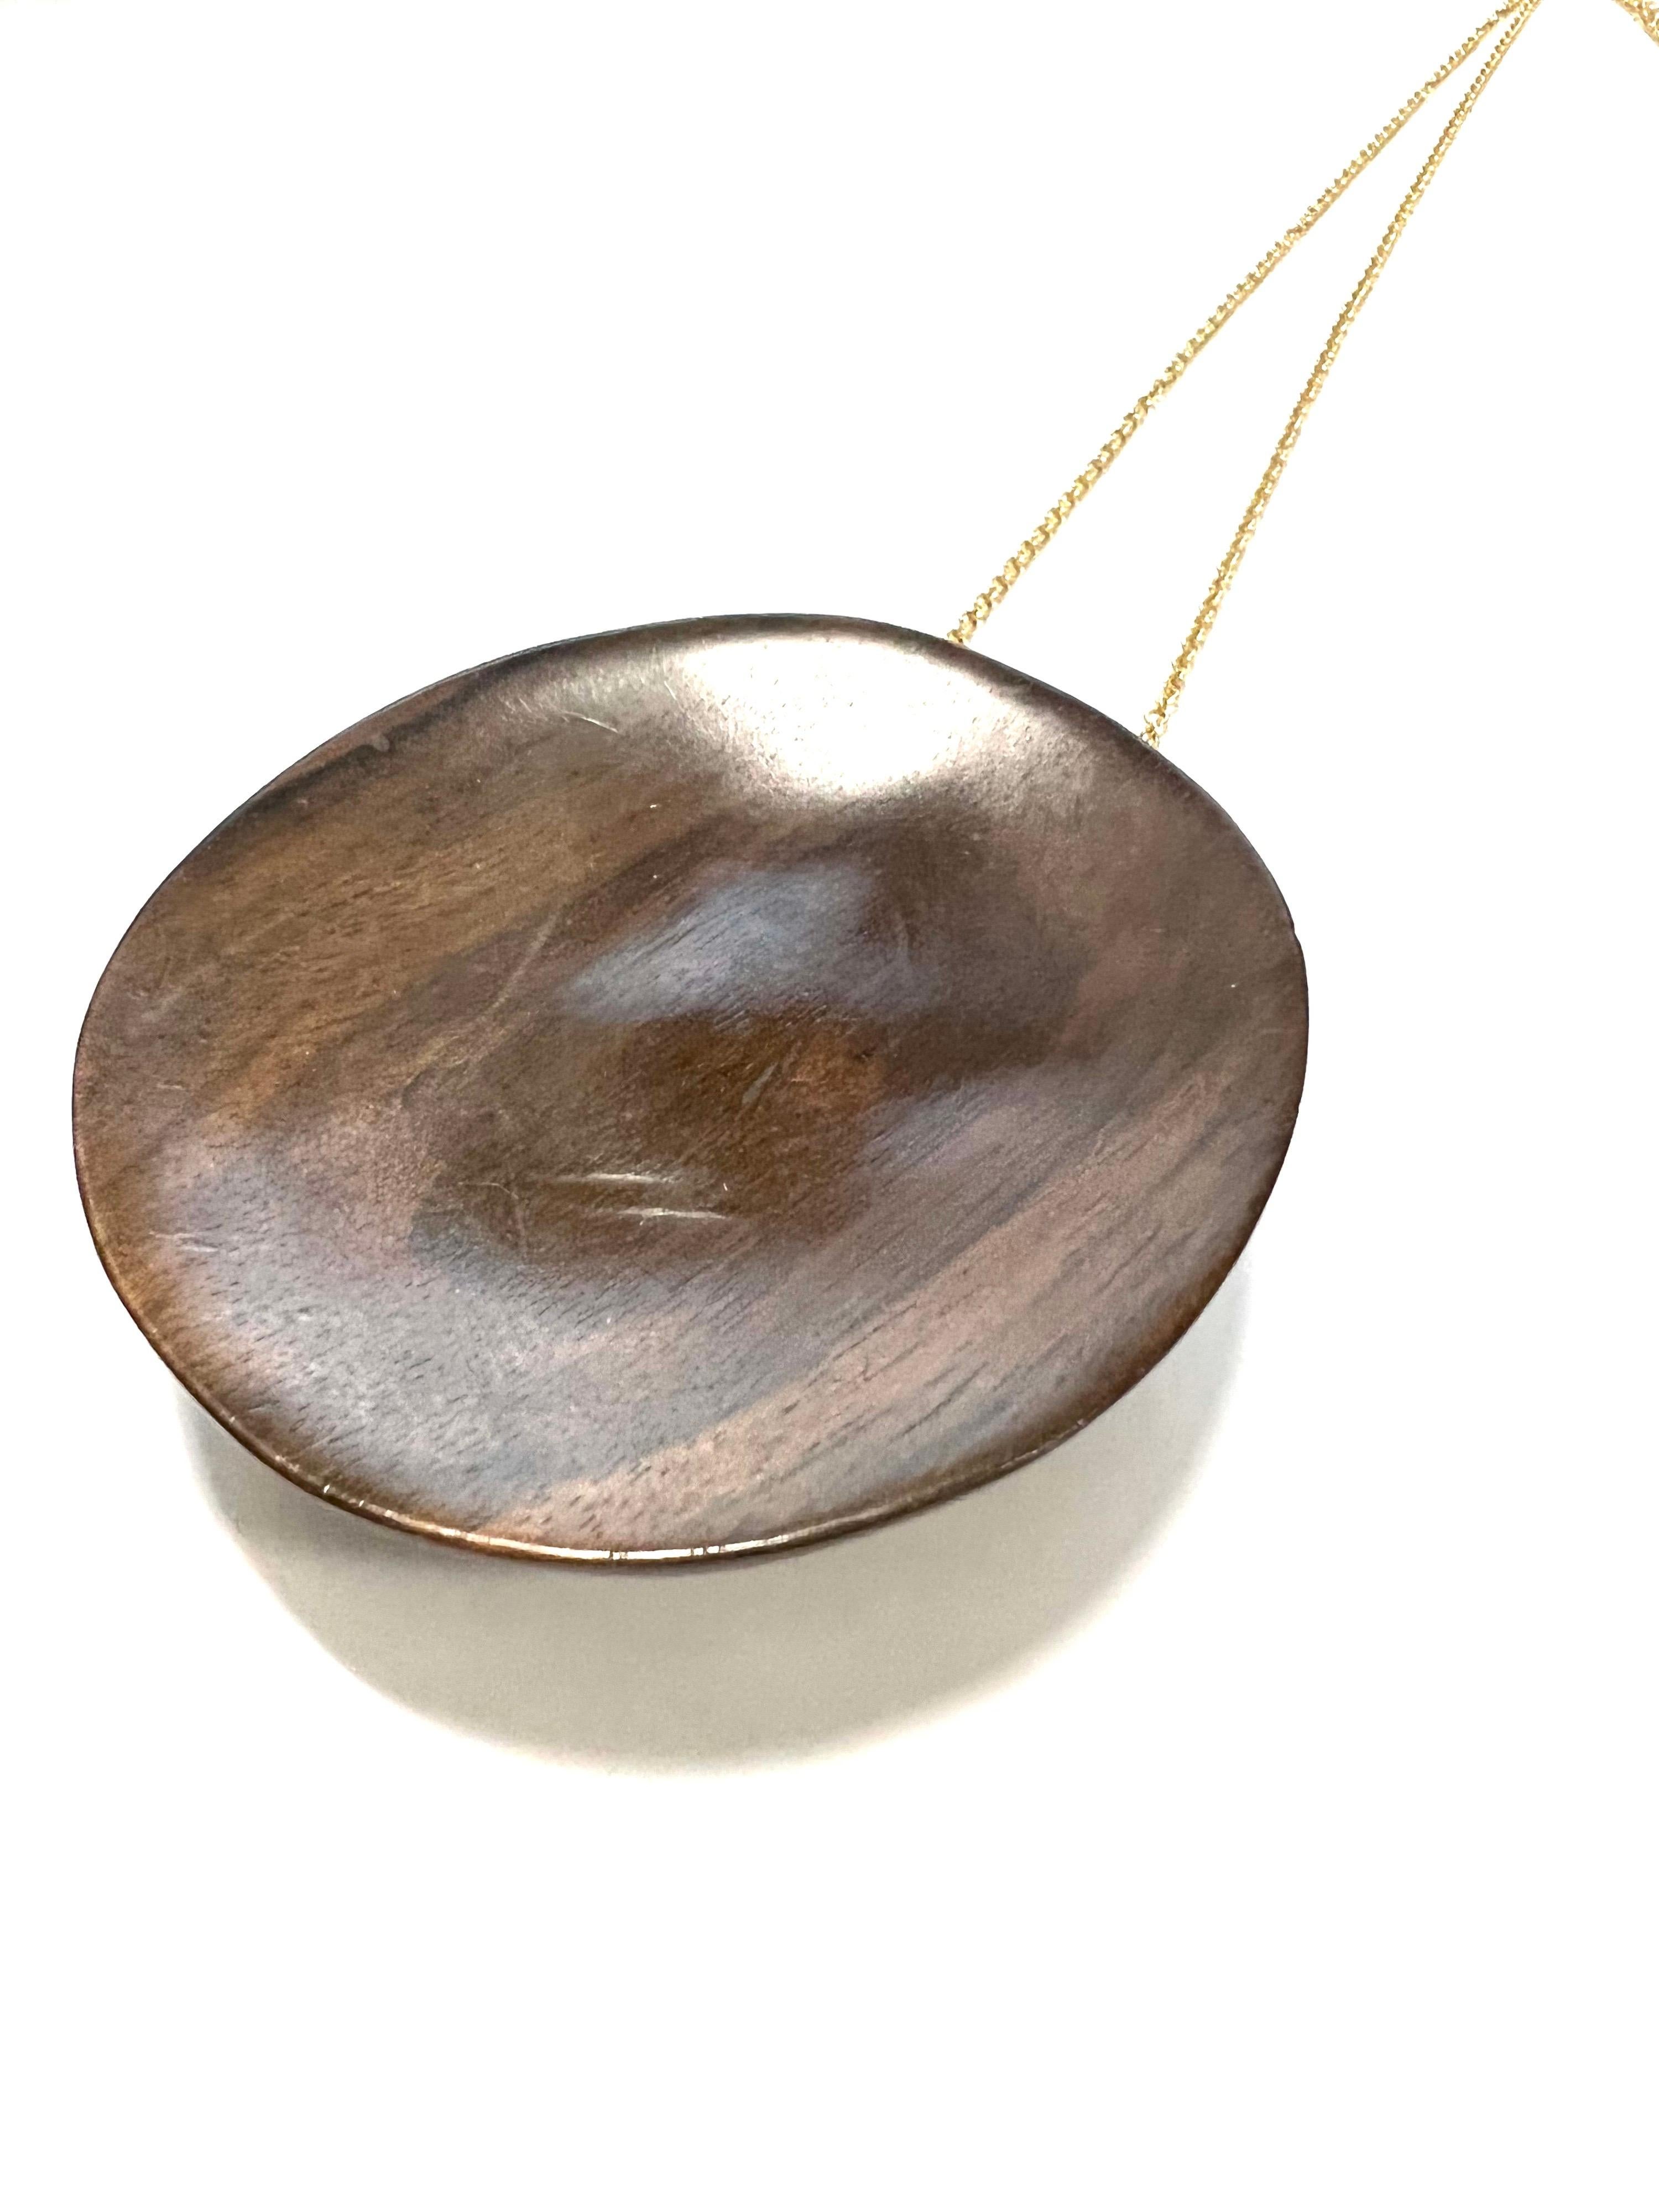 Big Full Concave Half Sphere Rosewood Pendant  On 18K Yellow Gold Necklace.
Rosewood is an elegant and precious wood.

Tot weight gr. 49
Gold weight gr. 12.4
Chain length cm.96
Micheletto's nameplate is on the back in 18k Yellow gold
with the STAMP